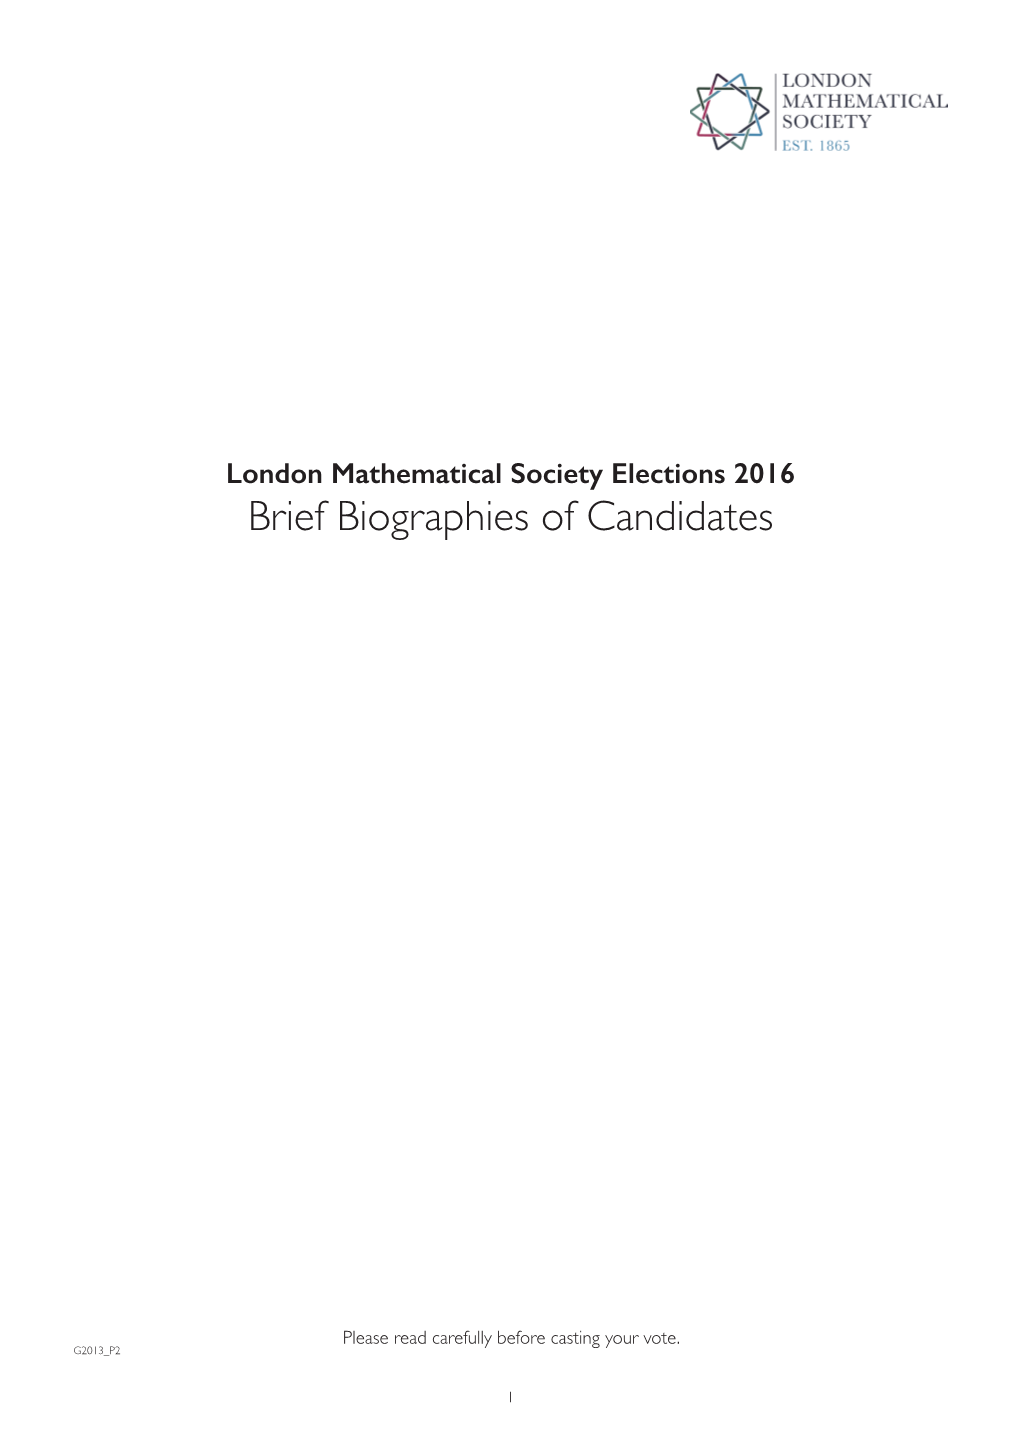 Brief Biographies of Candidates